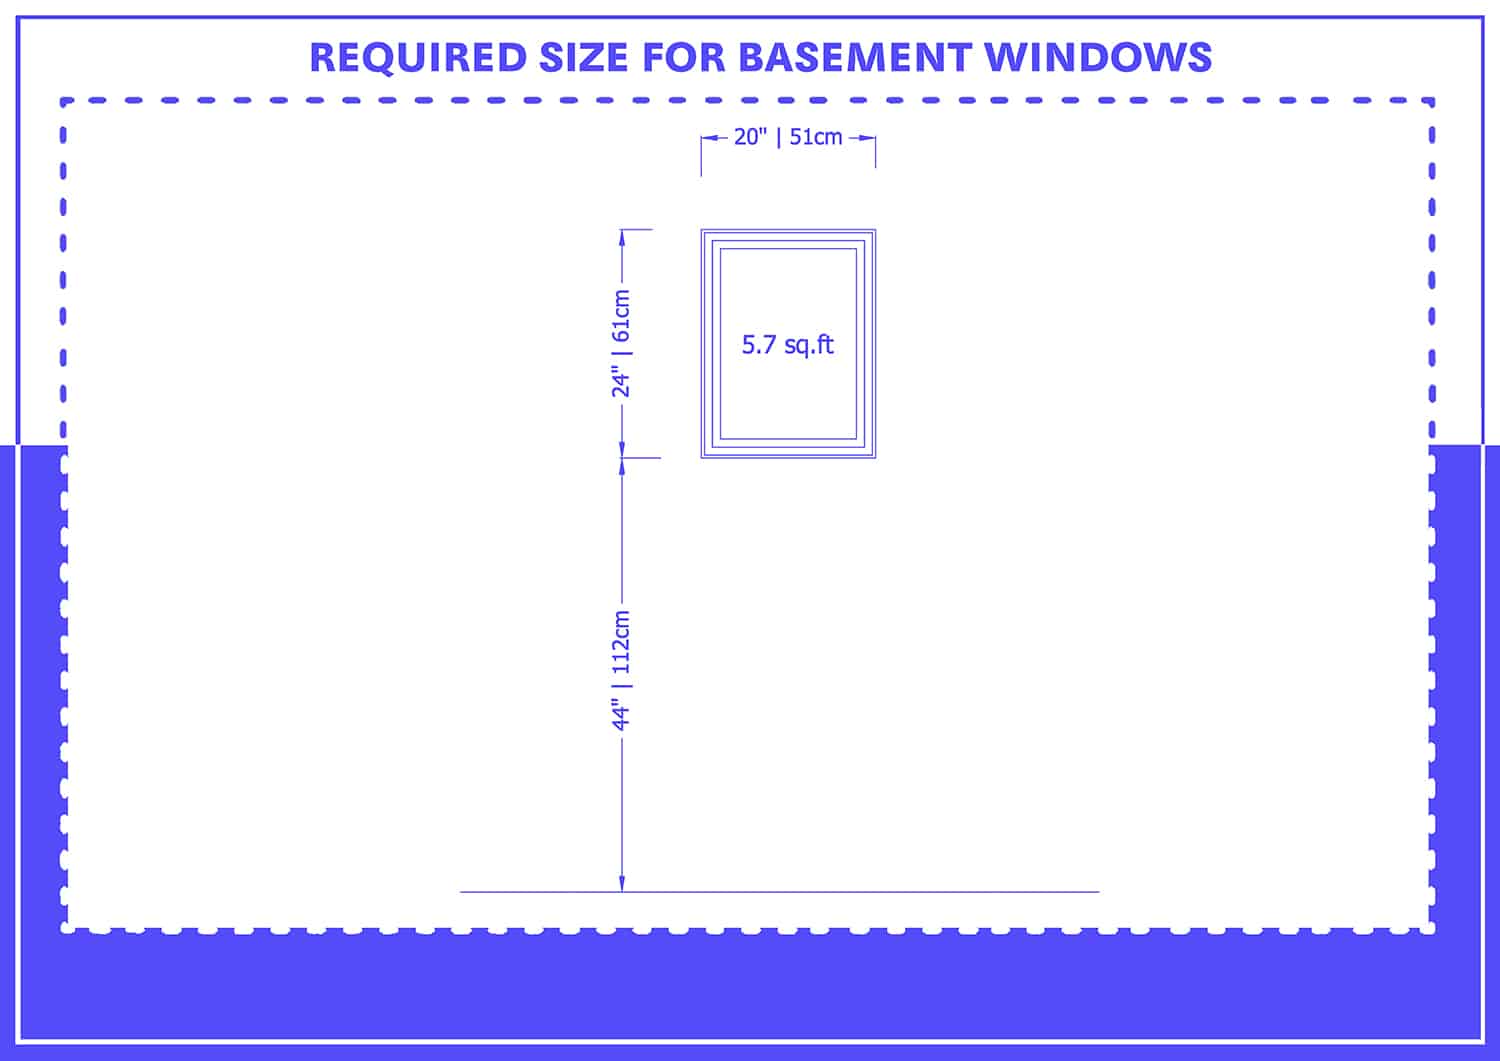 Required Size for Basement Windows